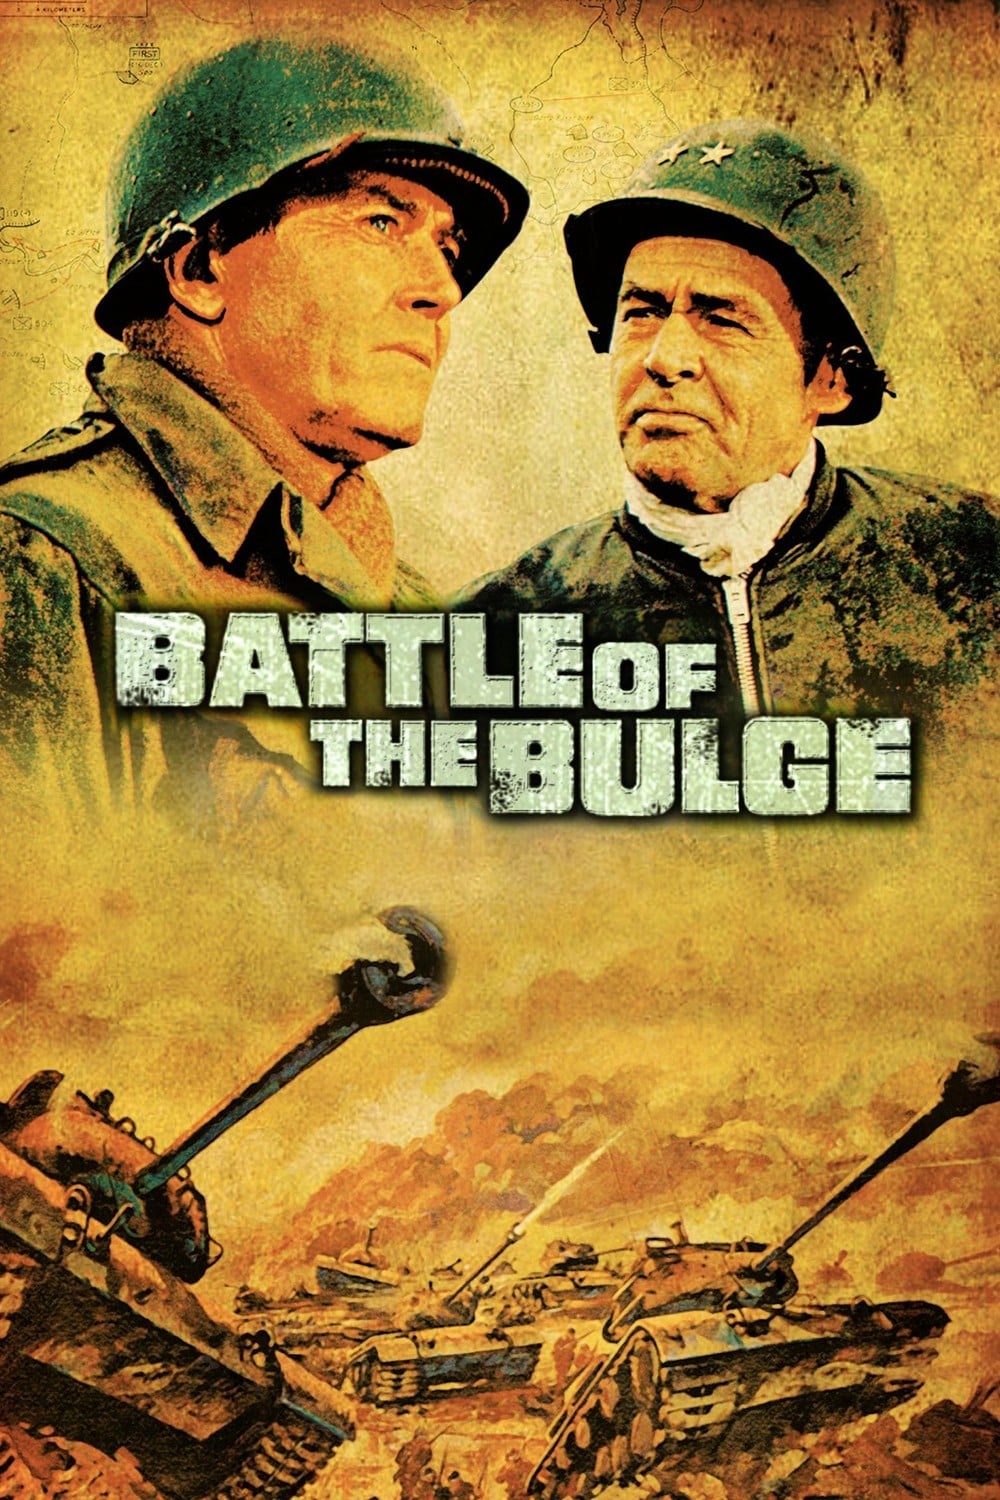 Poster for the movie "Battle of the Bulge"